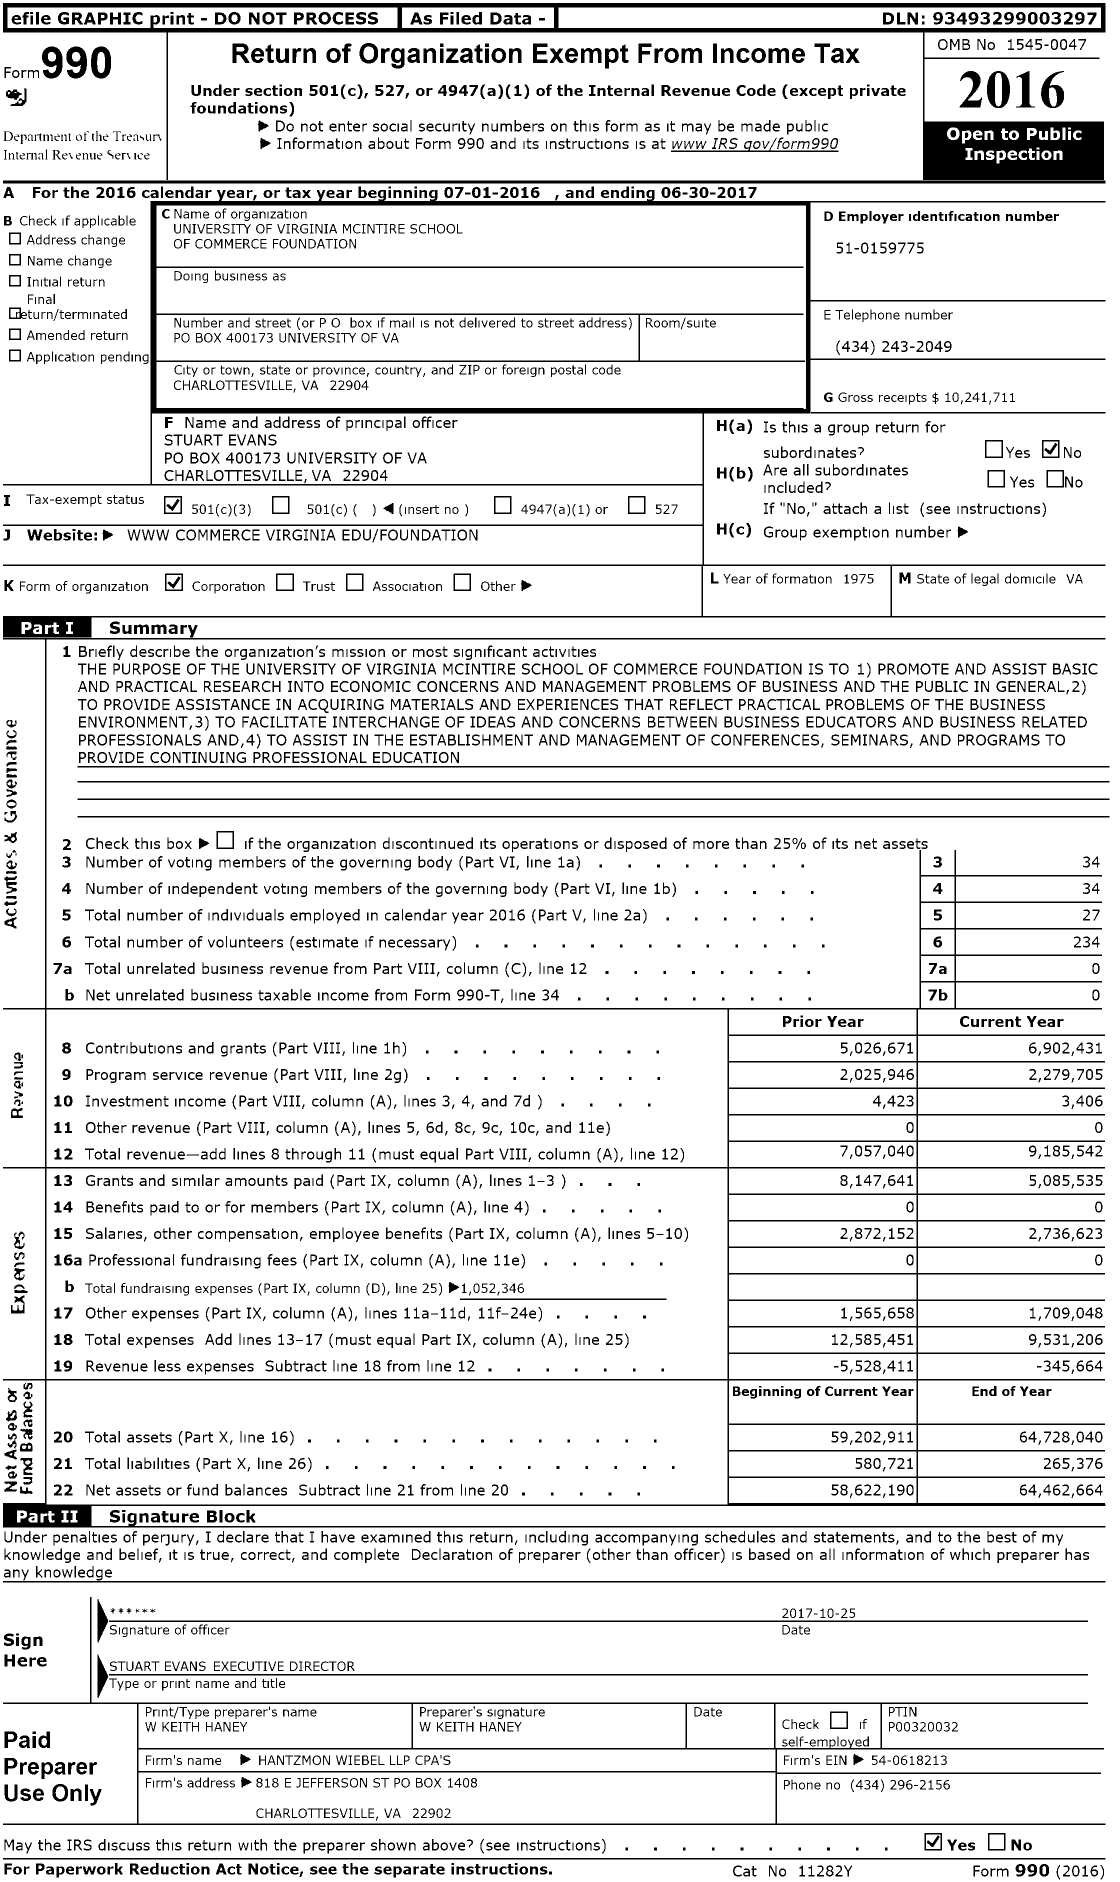 Image of first page of 2016 Form 990 for The University of Virginia Mcintire School of Commerce Foundation